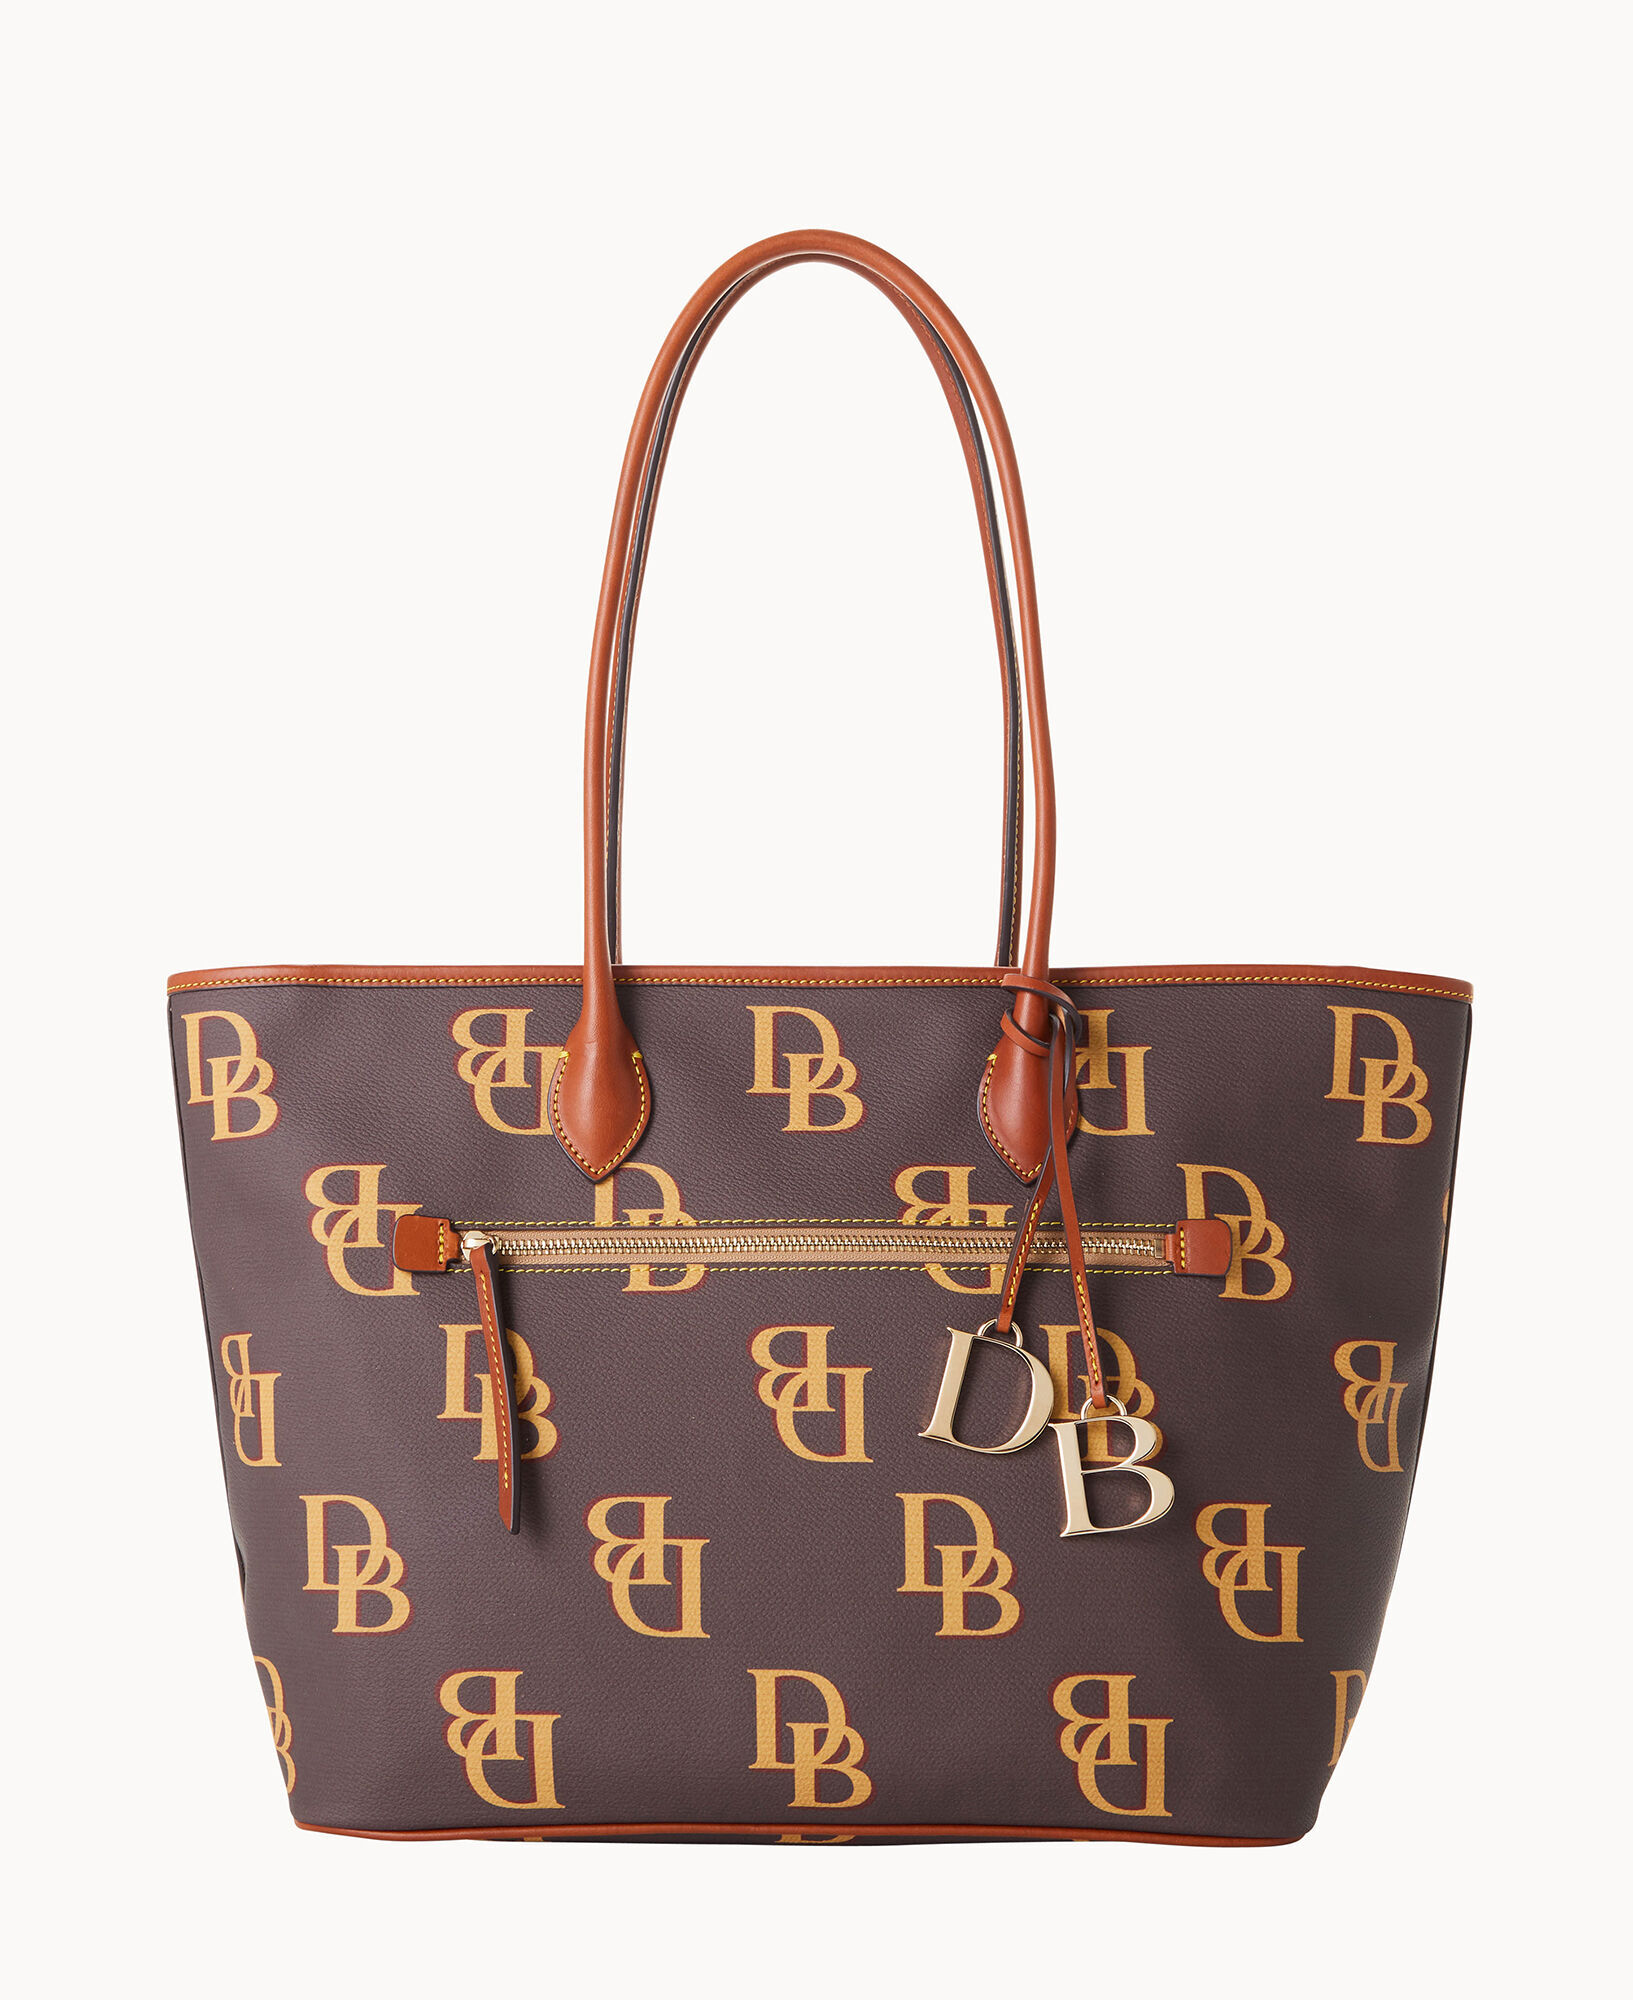 Looking for a super cute Louis Vuitton gift under $100? I've got